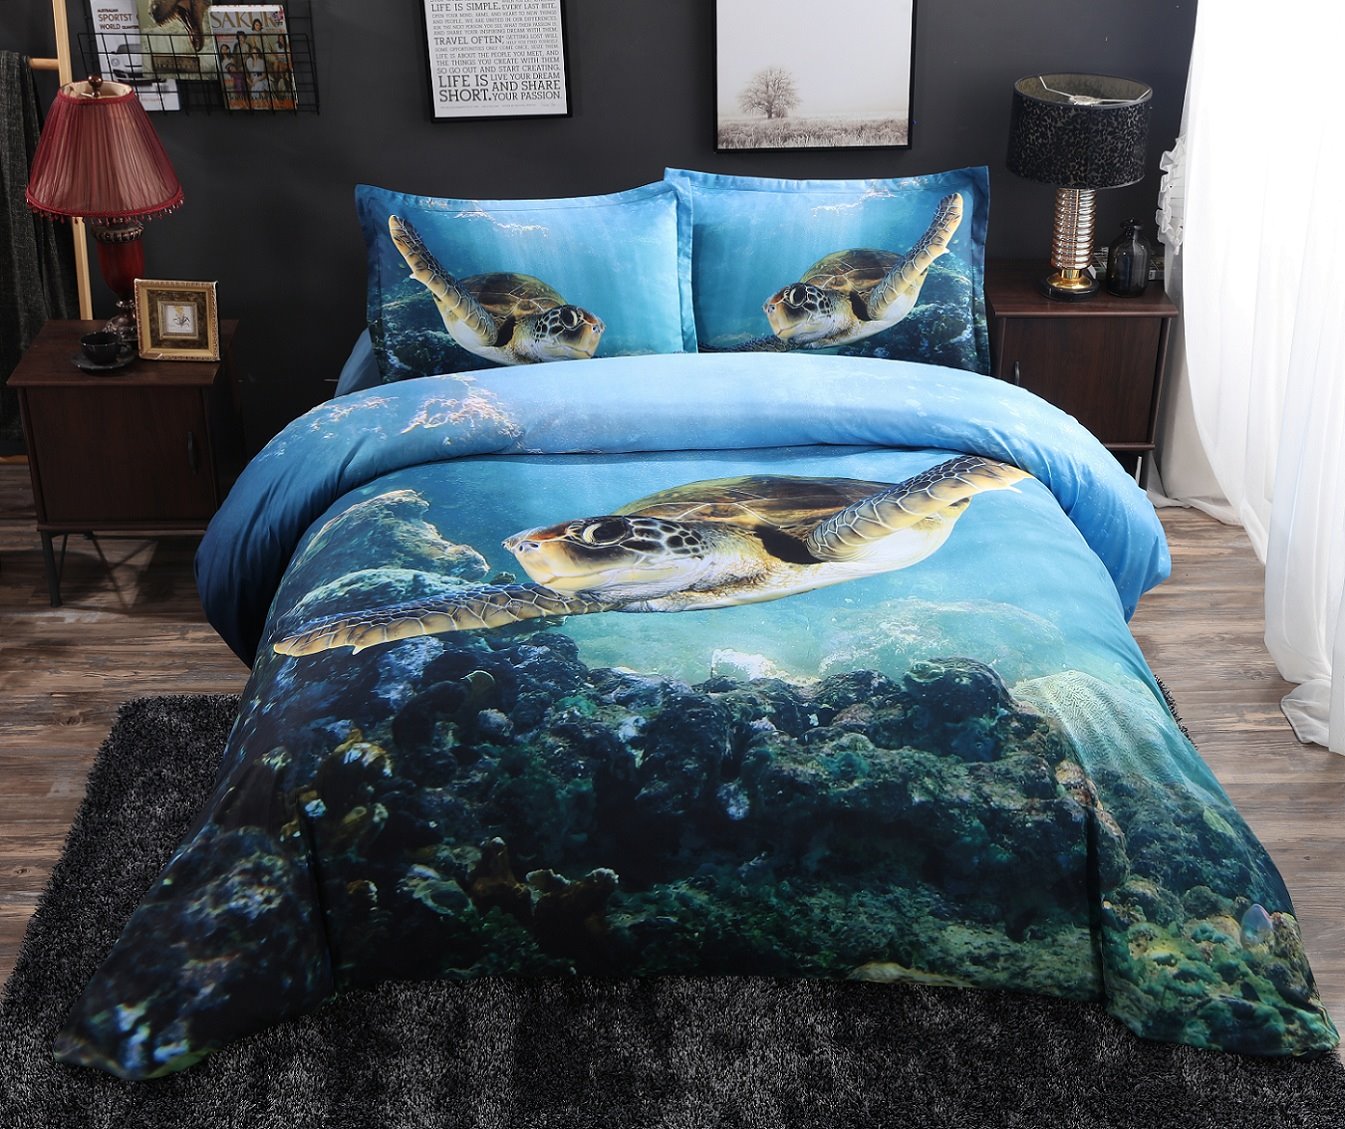 Swimming Turtle Blue Ocean Printed 4-Piece 3D Animal Bedding Sets/Duvet Covers